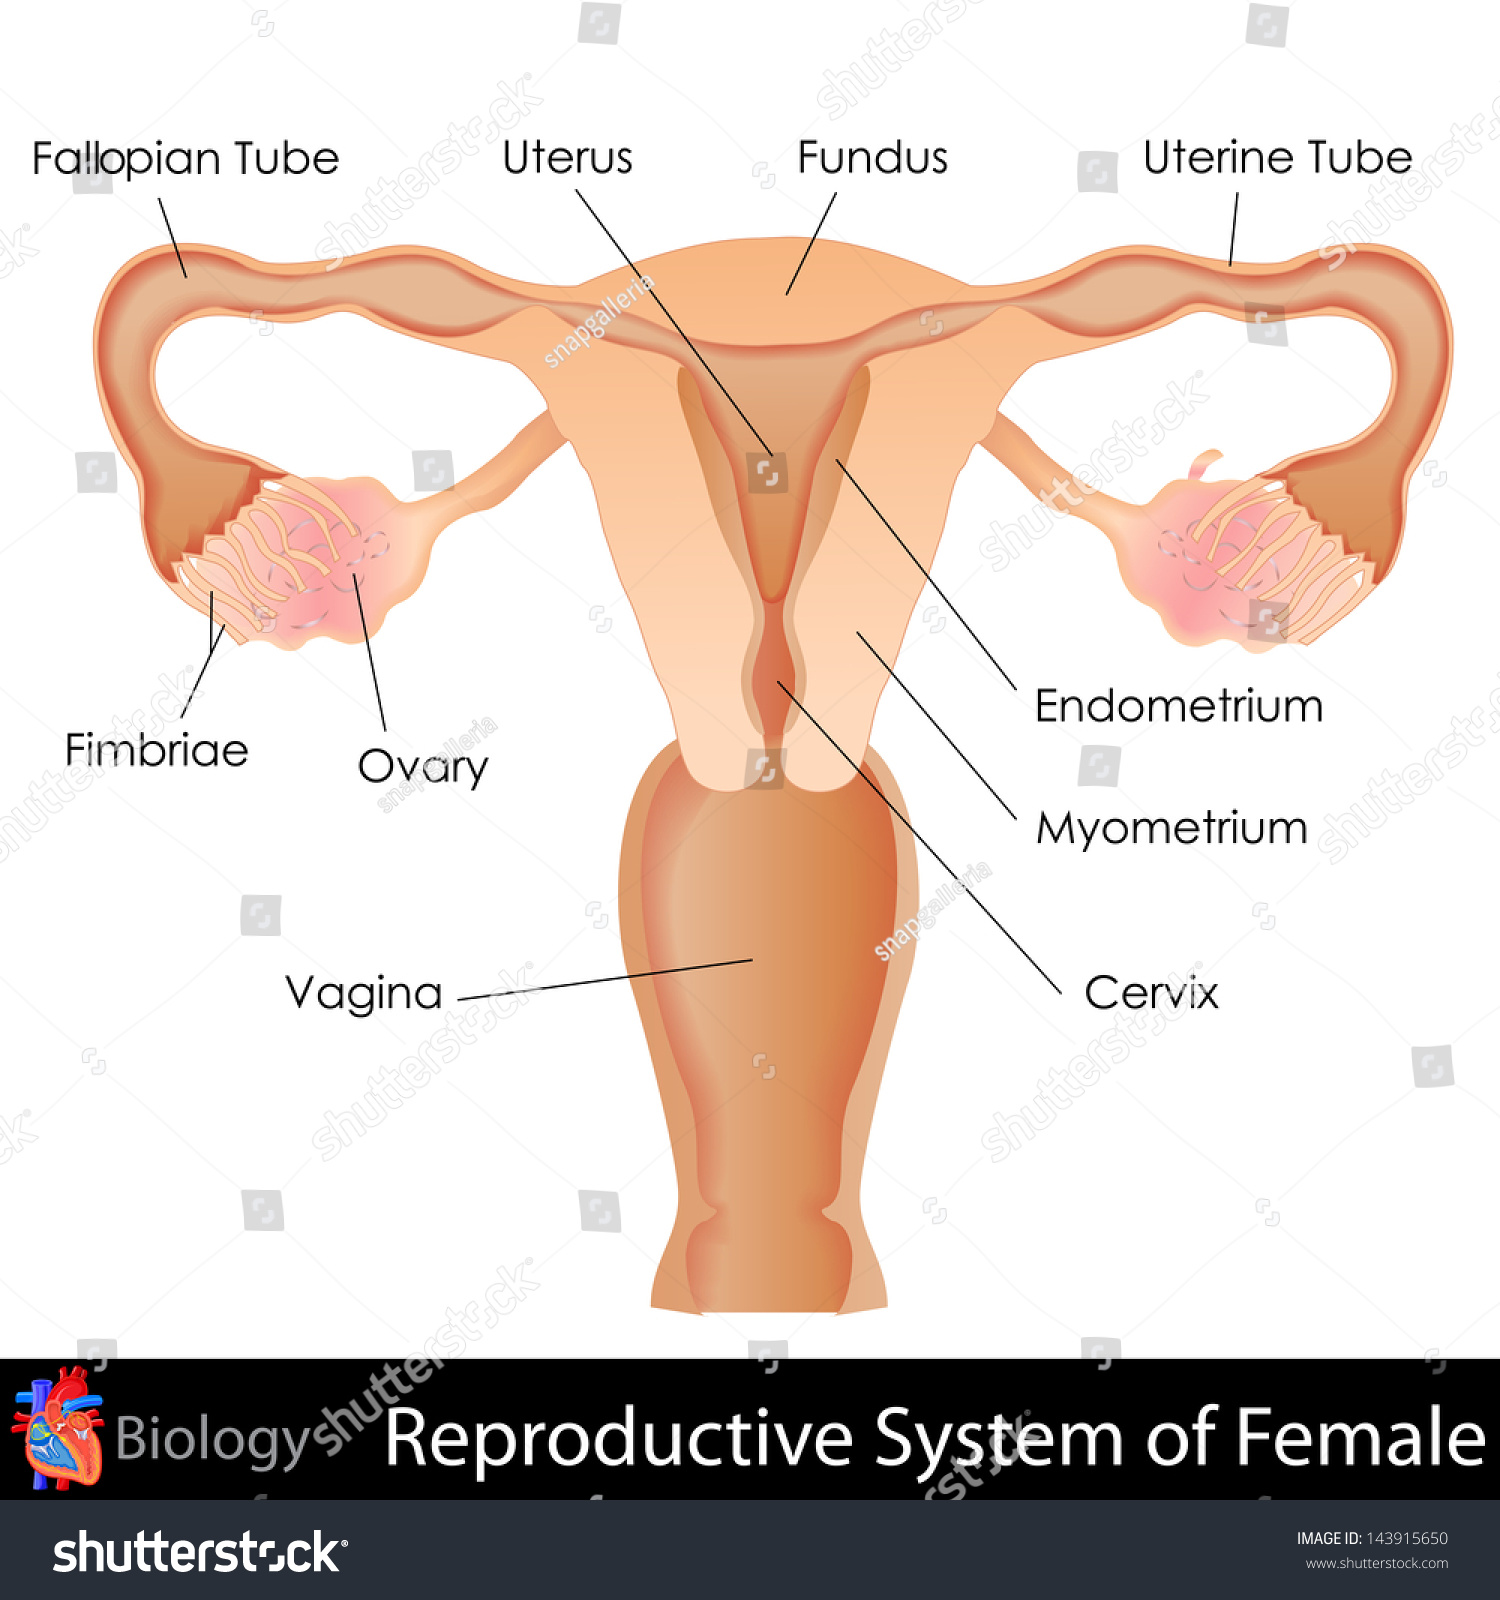 Easy To Edit Vector Illustration Of Female Reproductive